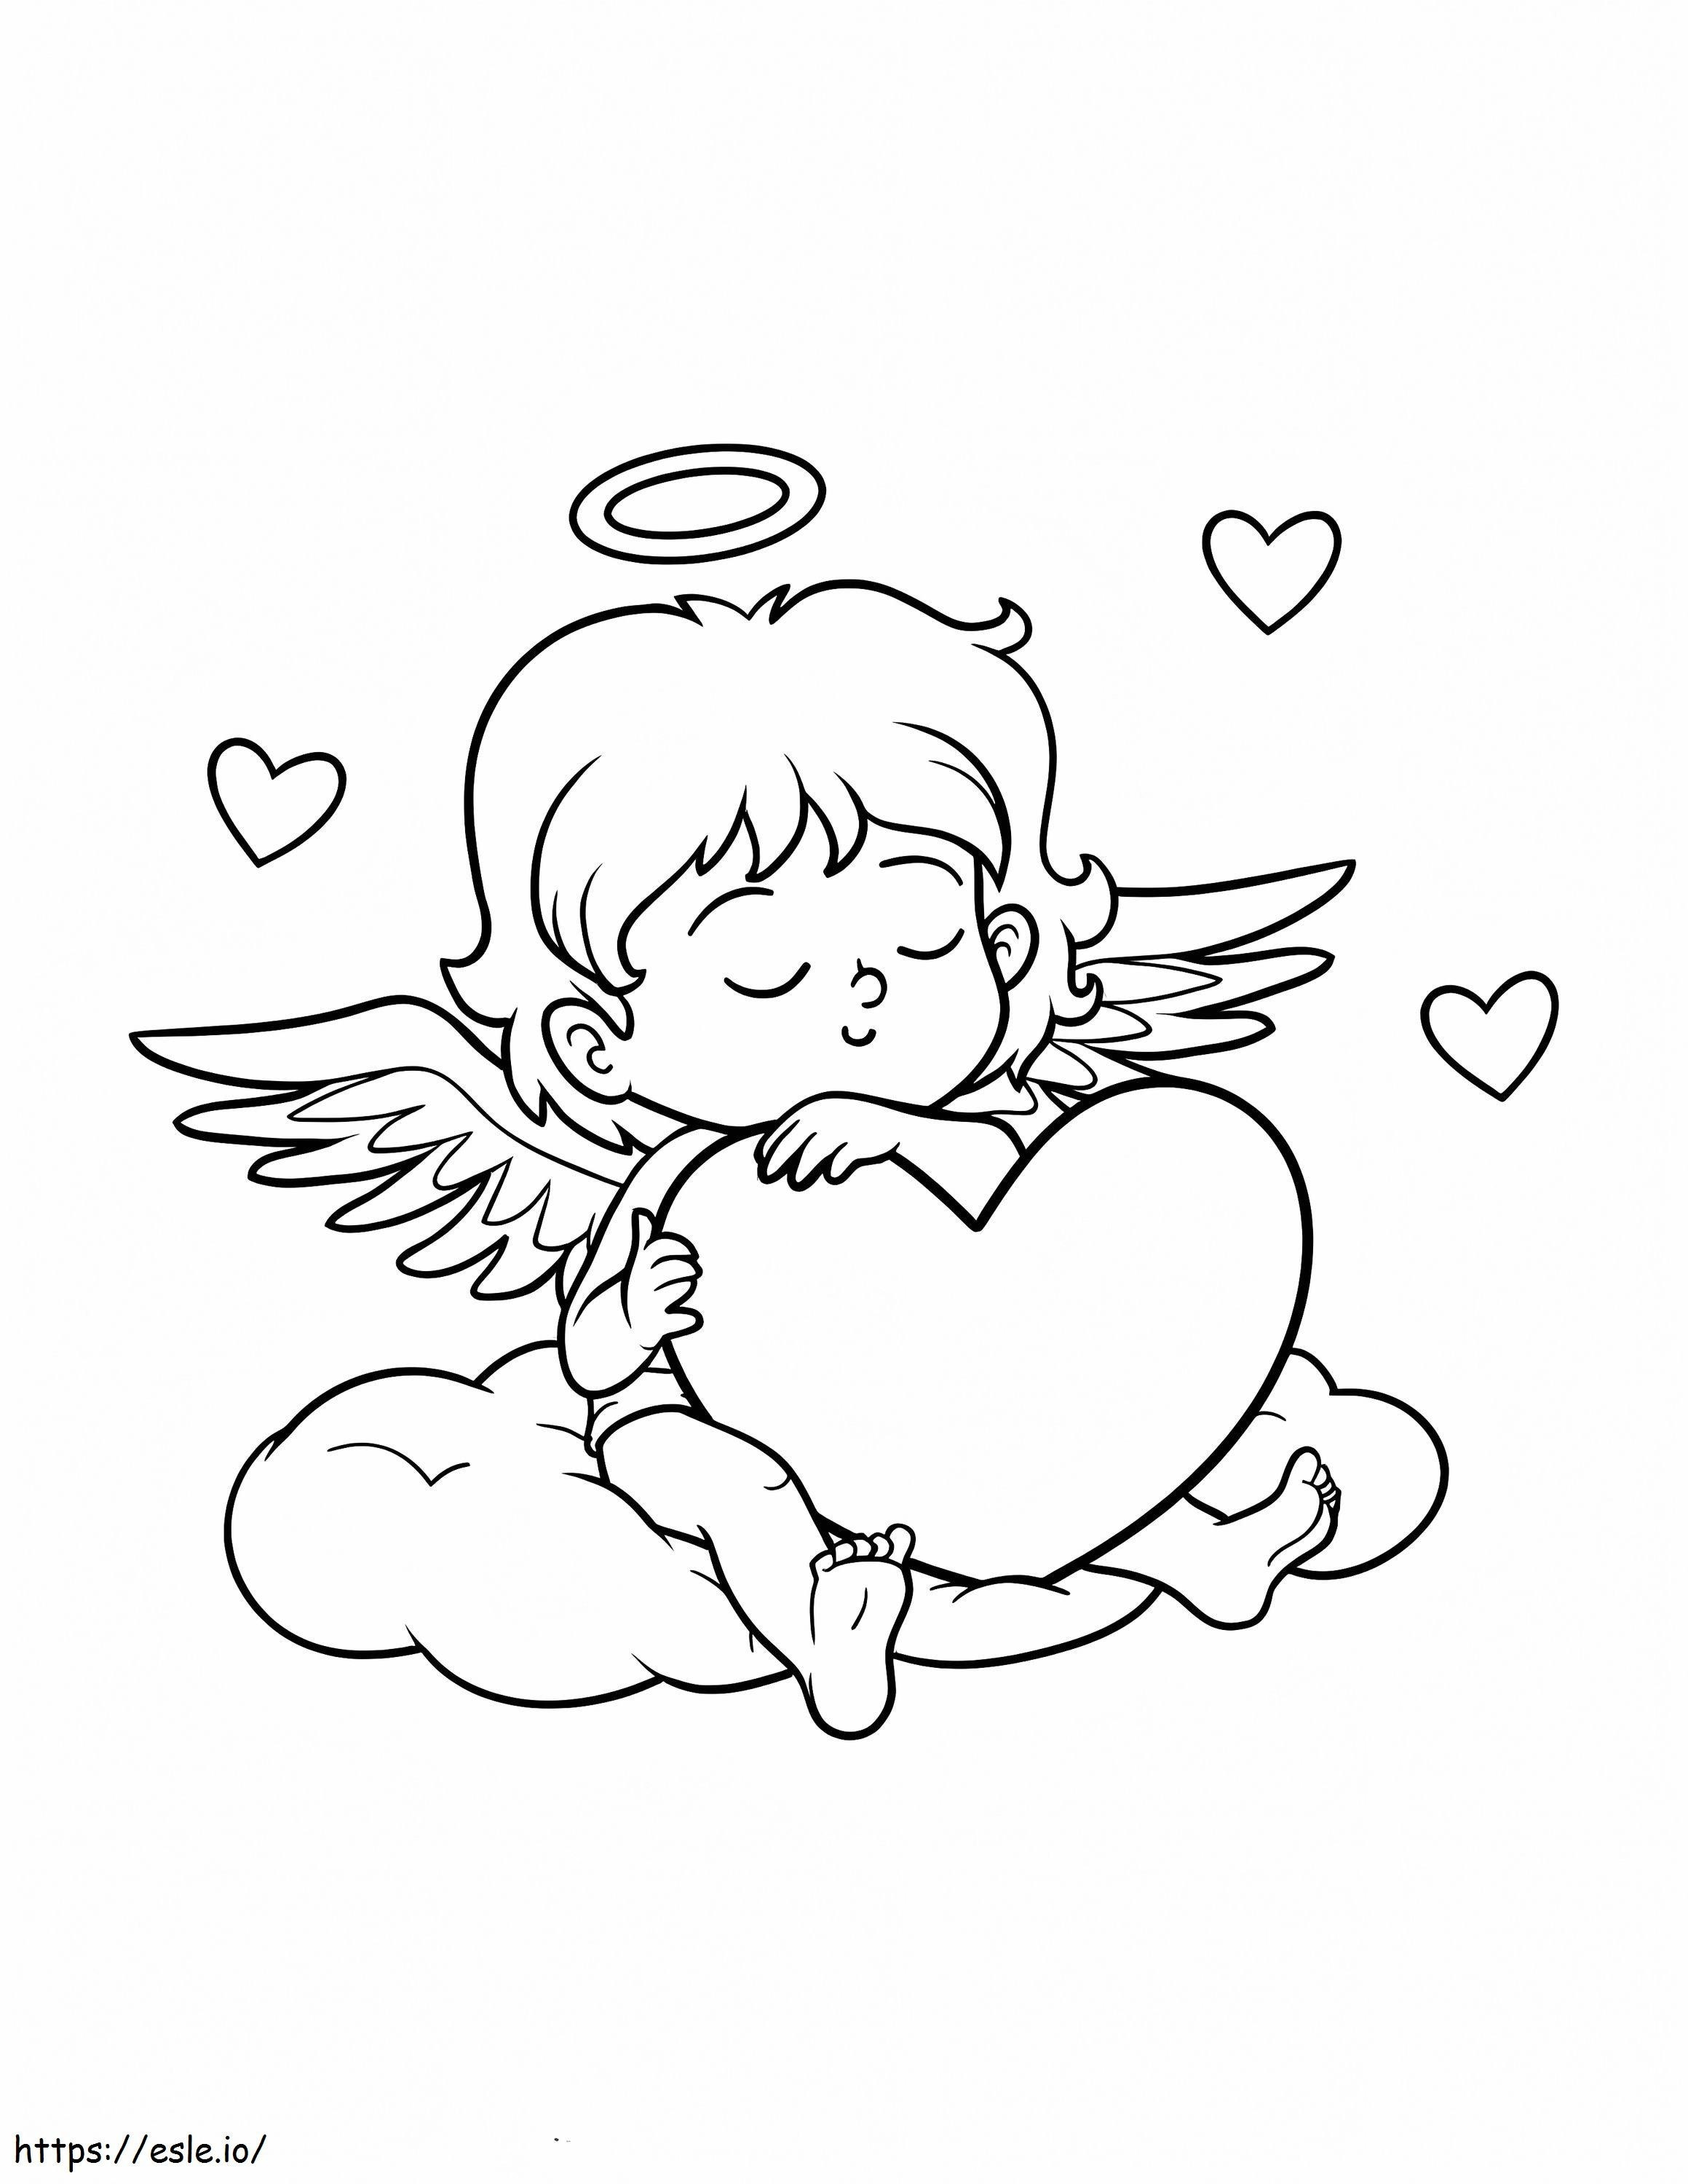 Sitting Cupid And Heart coloring page